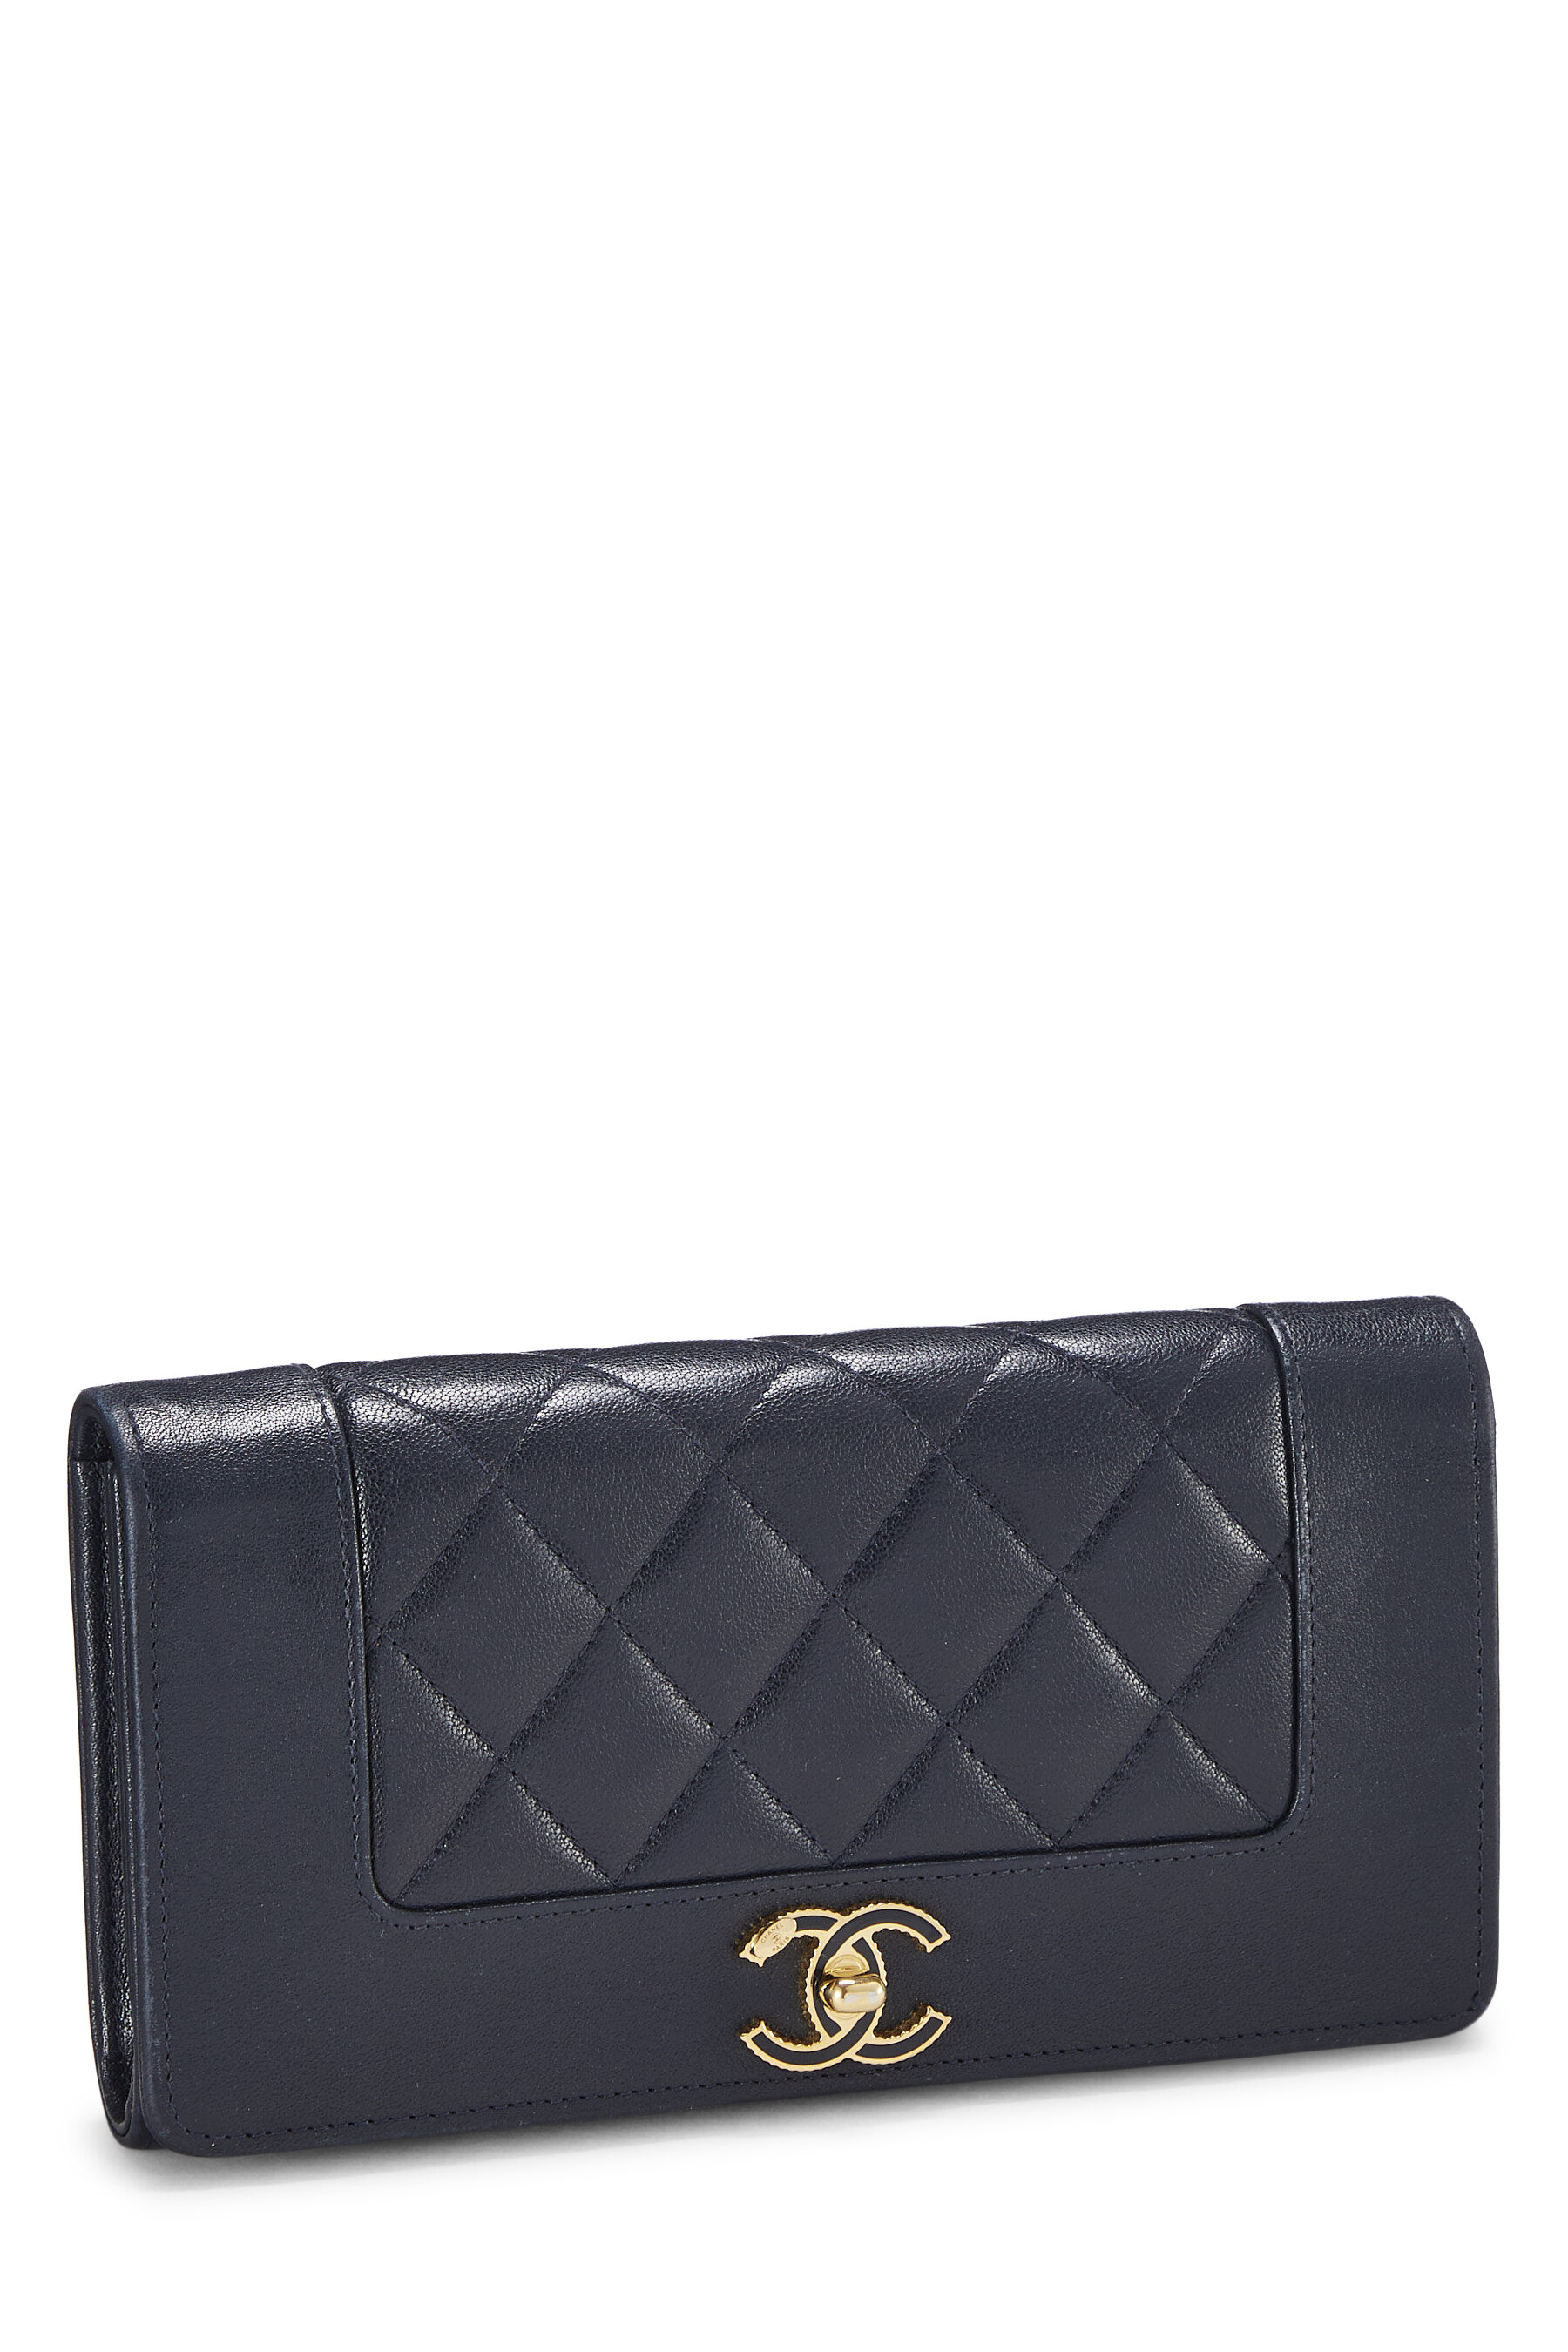 Chanel Navy Quilted Lambskin Mademoiselle Wallet Q6A4YX1INB000